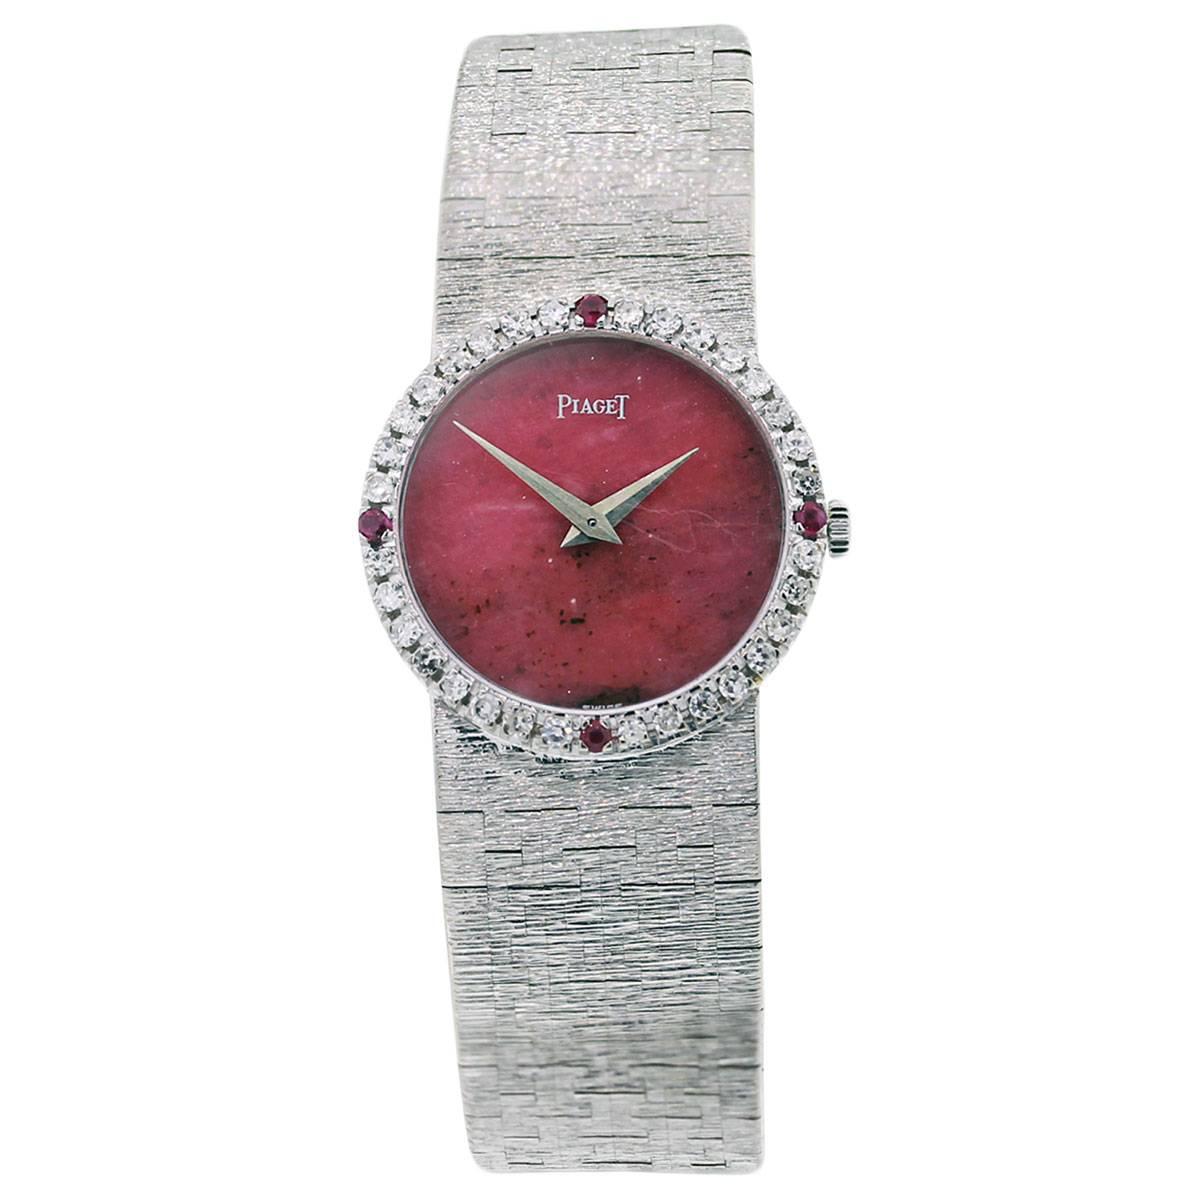 Brand: Piaget
Style	: 18k White Gold Ruby Red Hardstone Dial with Diamond & Ruby Bezel Watch
MPN: 9706 A 6
Case Material	18k White Gold
Case Diameter: 24mm
Bezel:18k White Gold and Factory Diamond & Ruby Bezel
Diamond Details: Diamonds are G